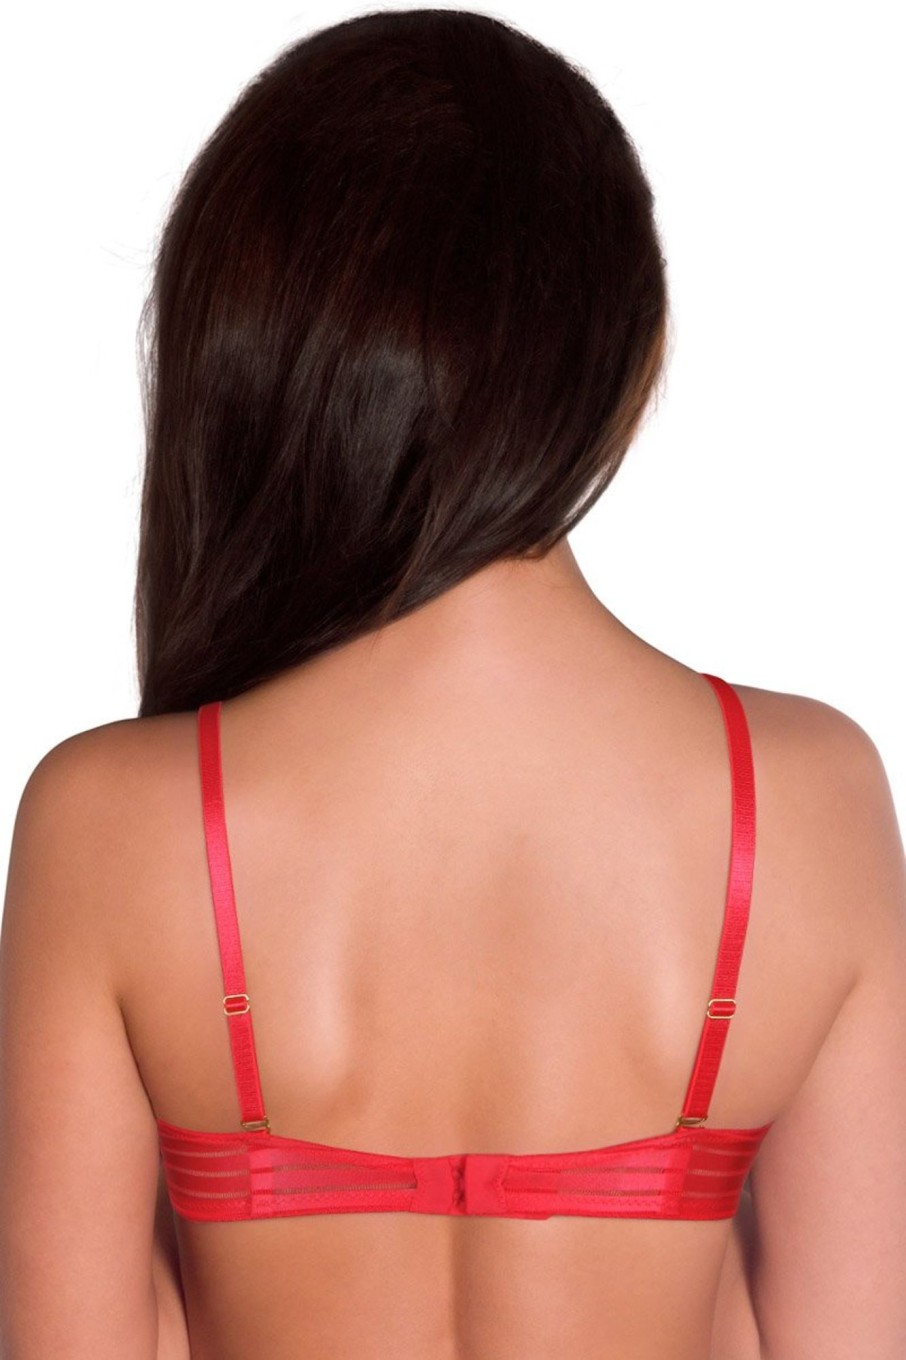 Summer's Lace Padded Wired Racerback T-Shirt Bra - Tango Red